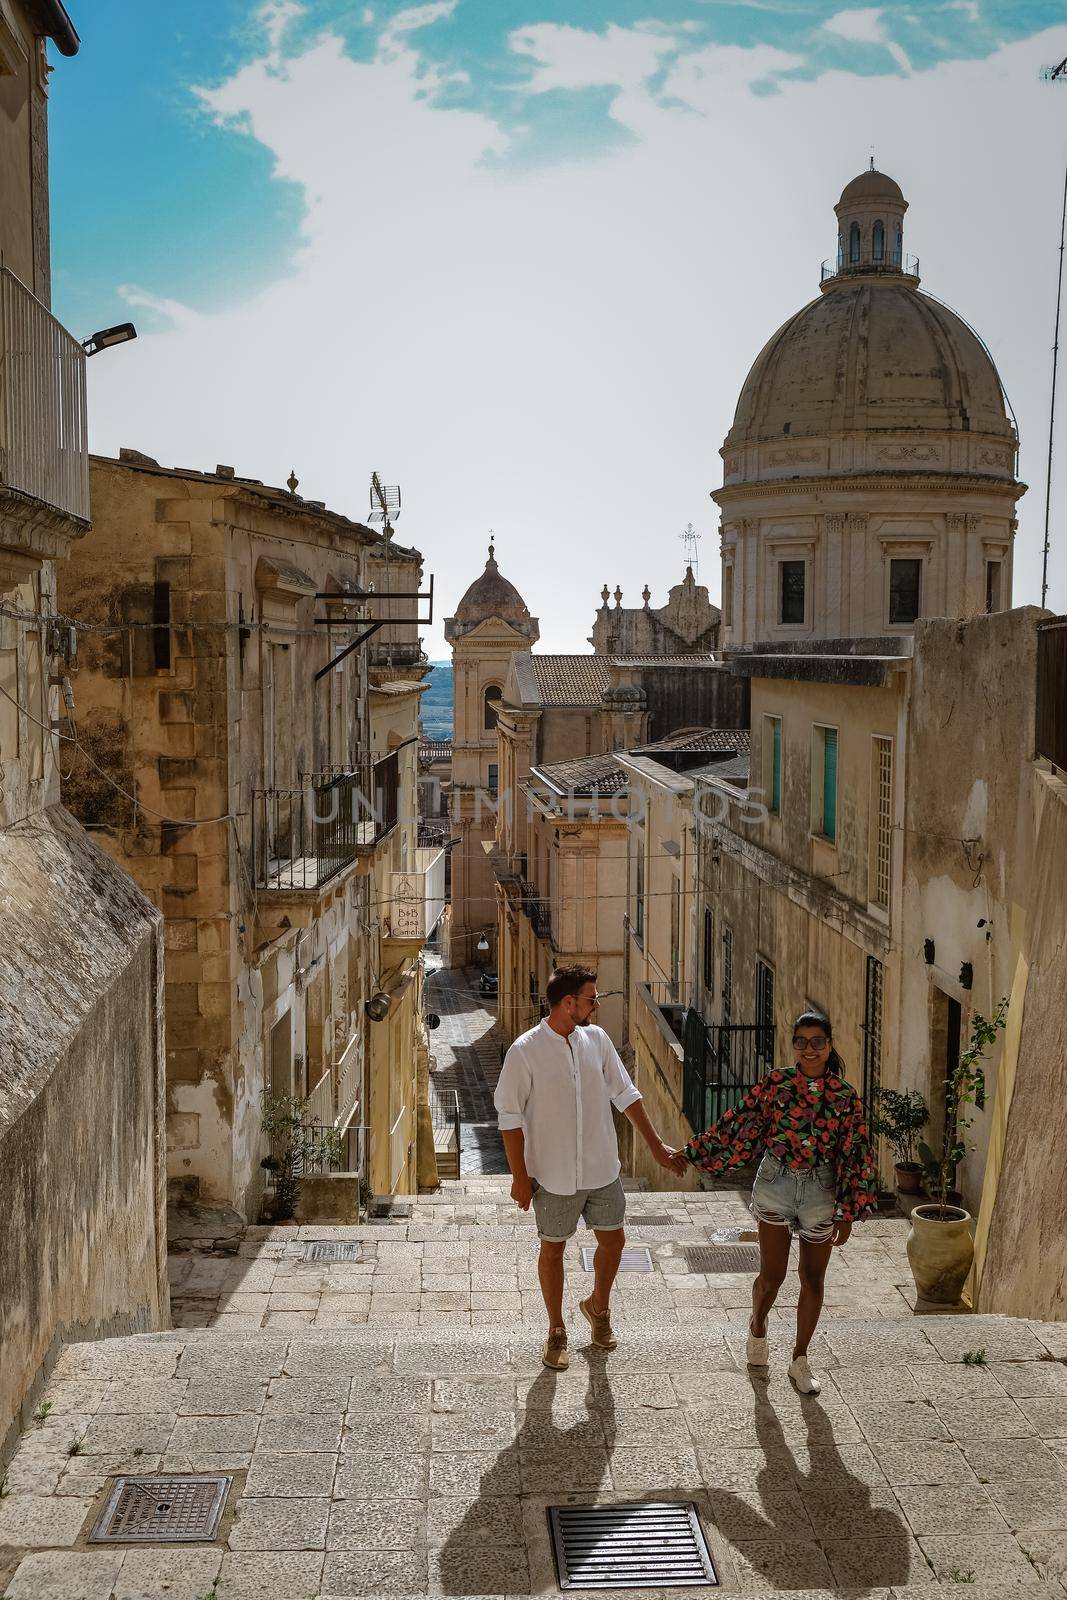 Sicily Italy, view of Noto old town and Noto Cathedral, Sicily, Italy. by fokkebok